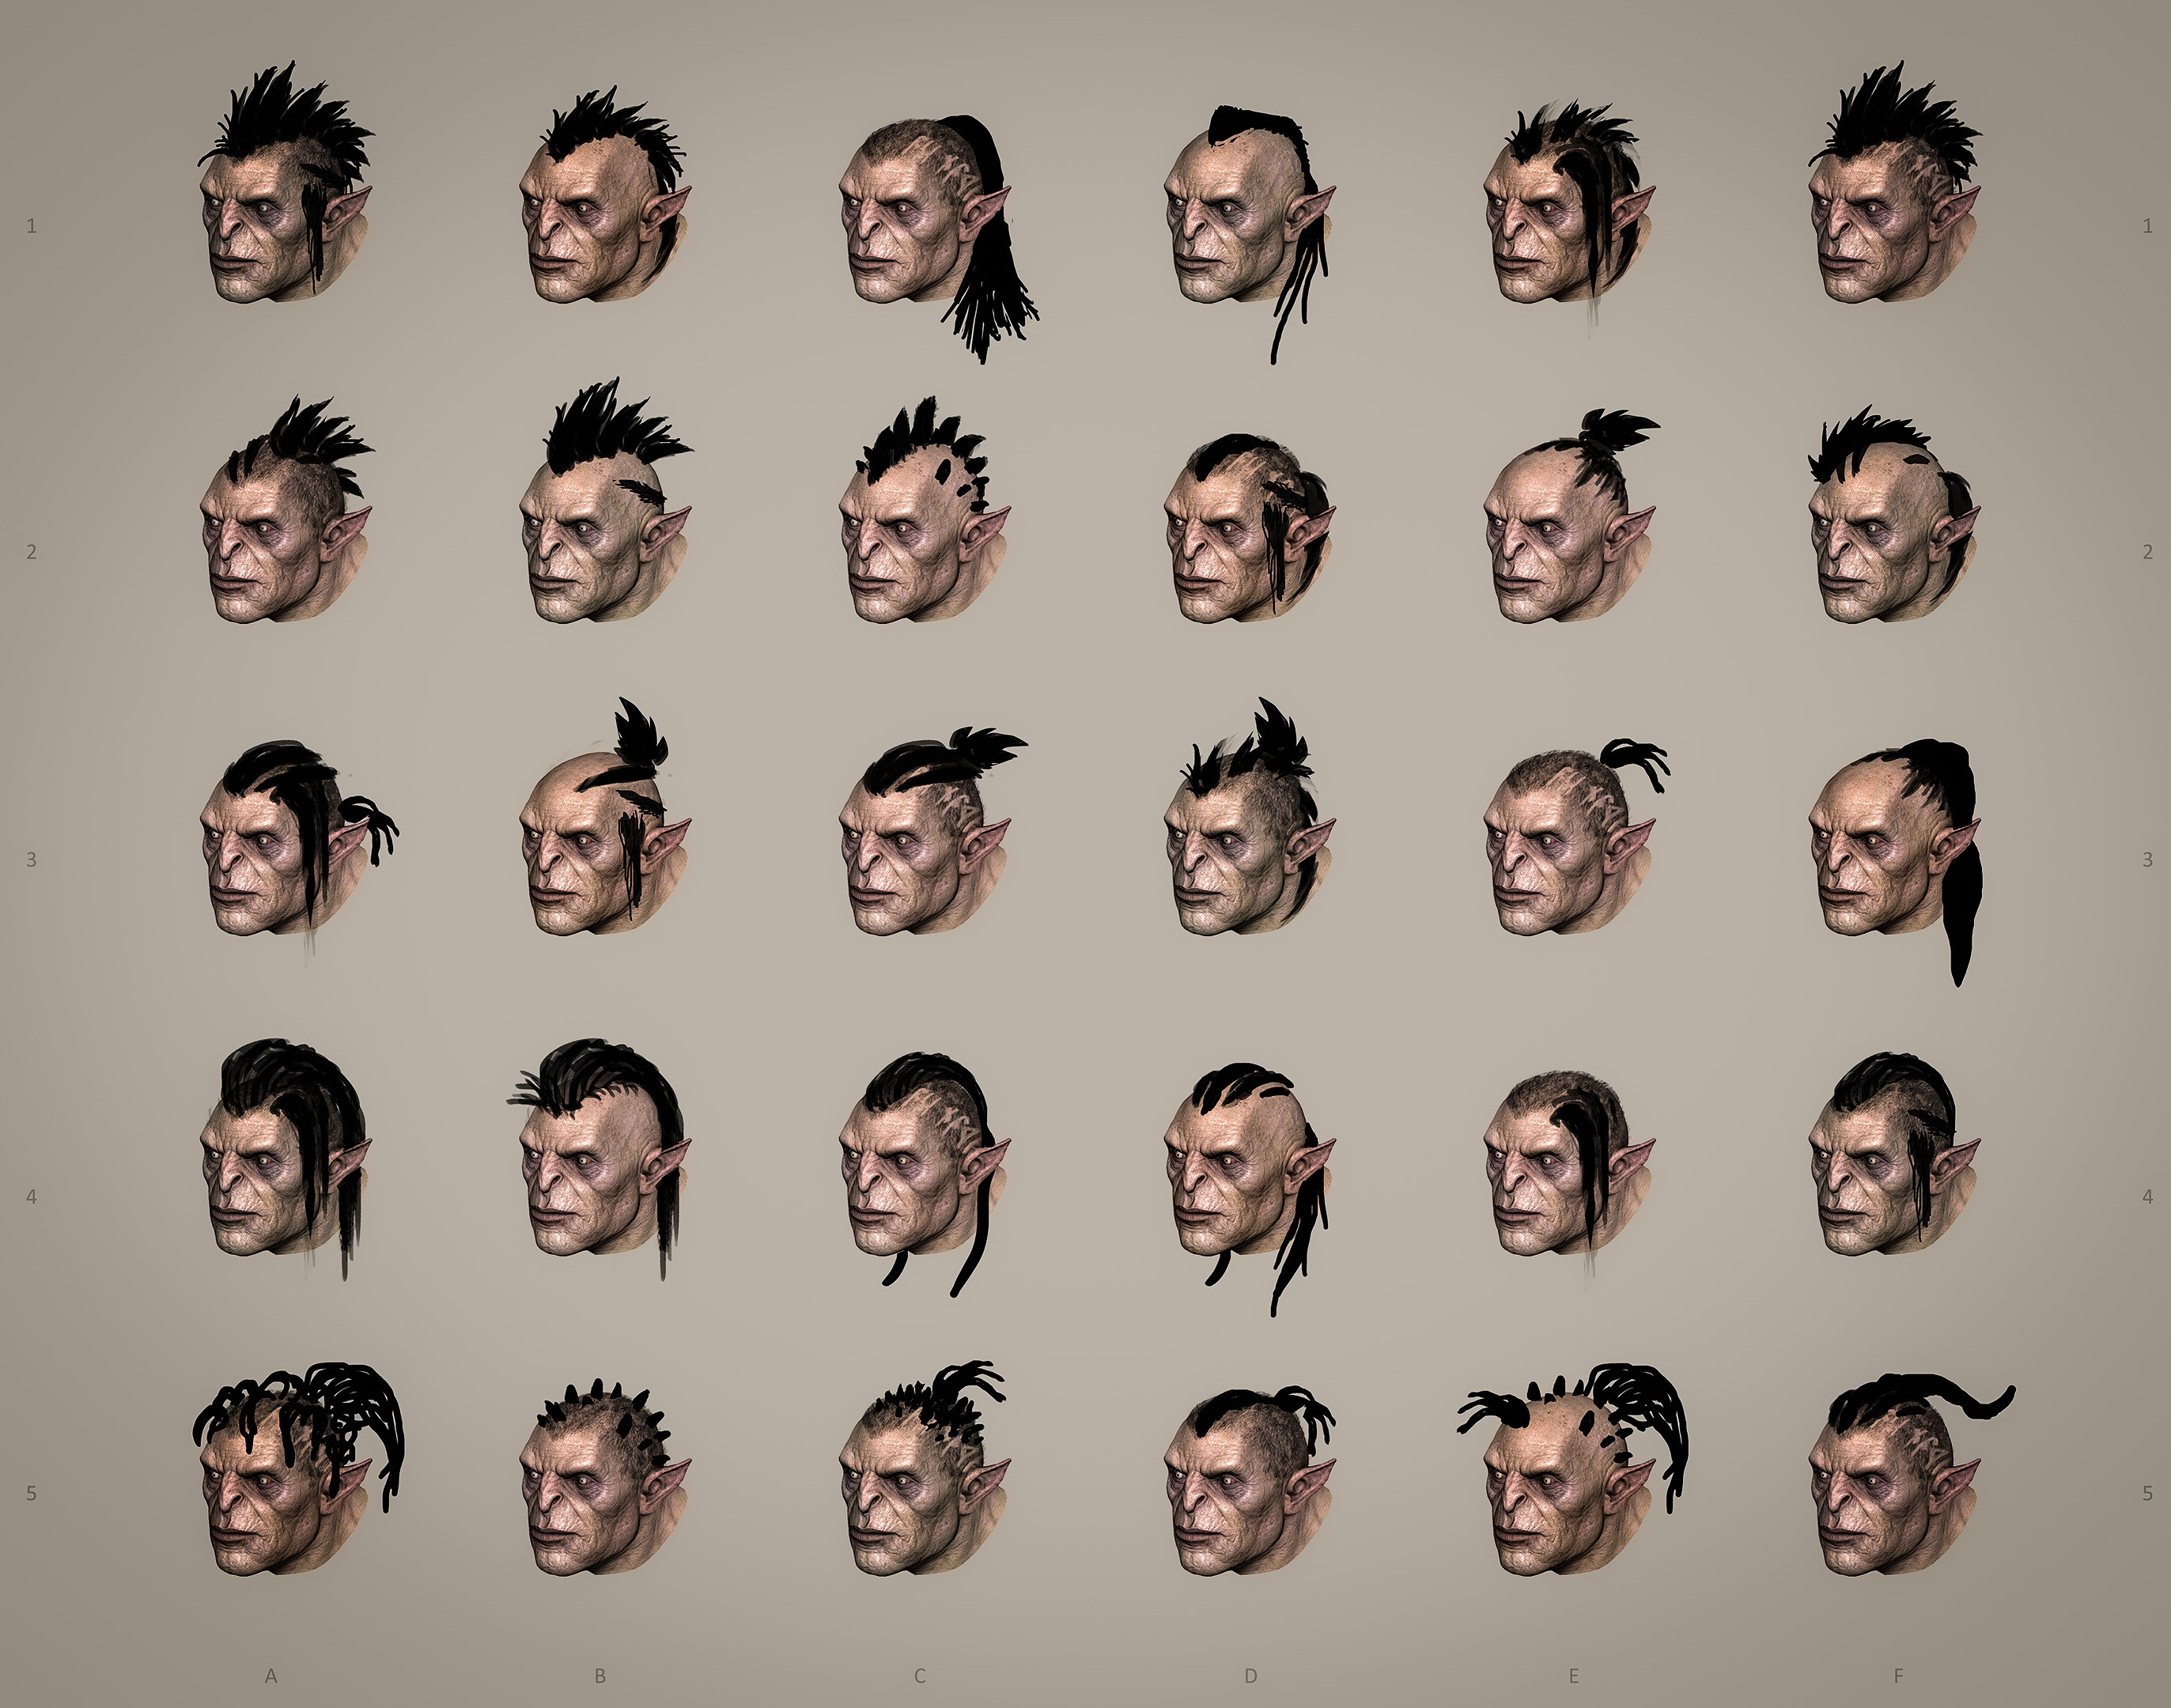 Orc Barbershop! Designs for hairstyles that could be mixed and matched to create a lot of variety.